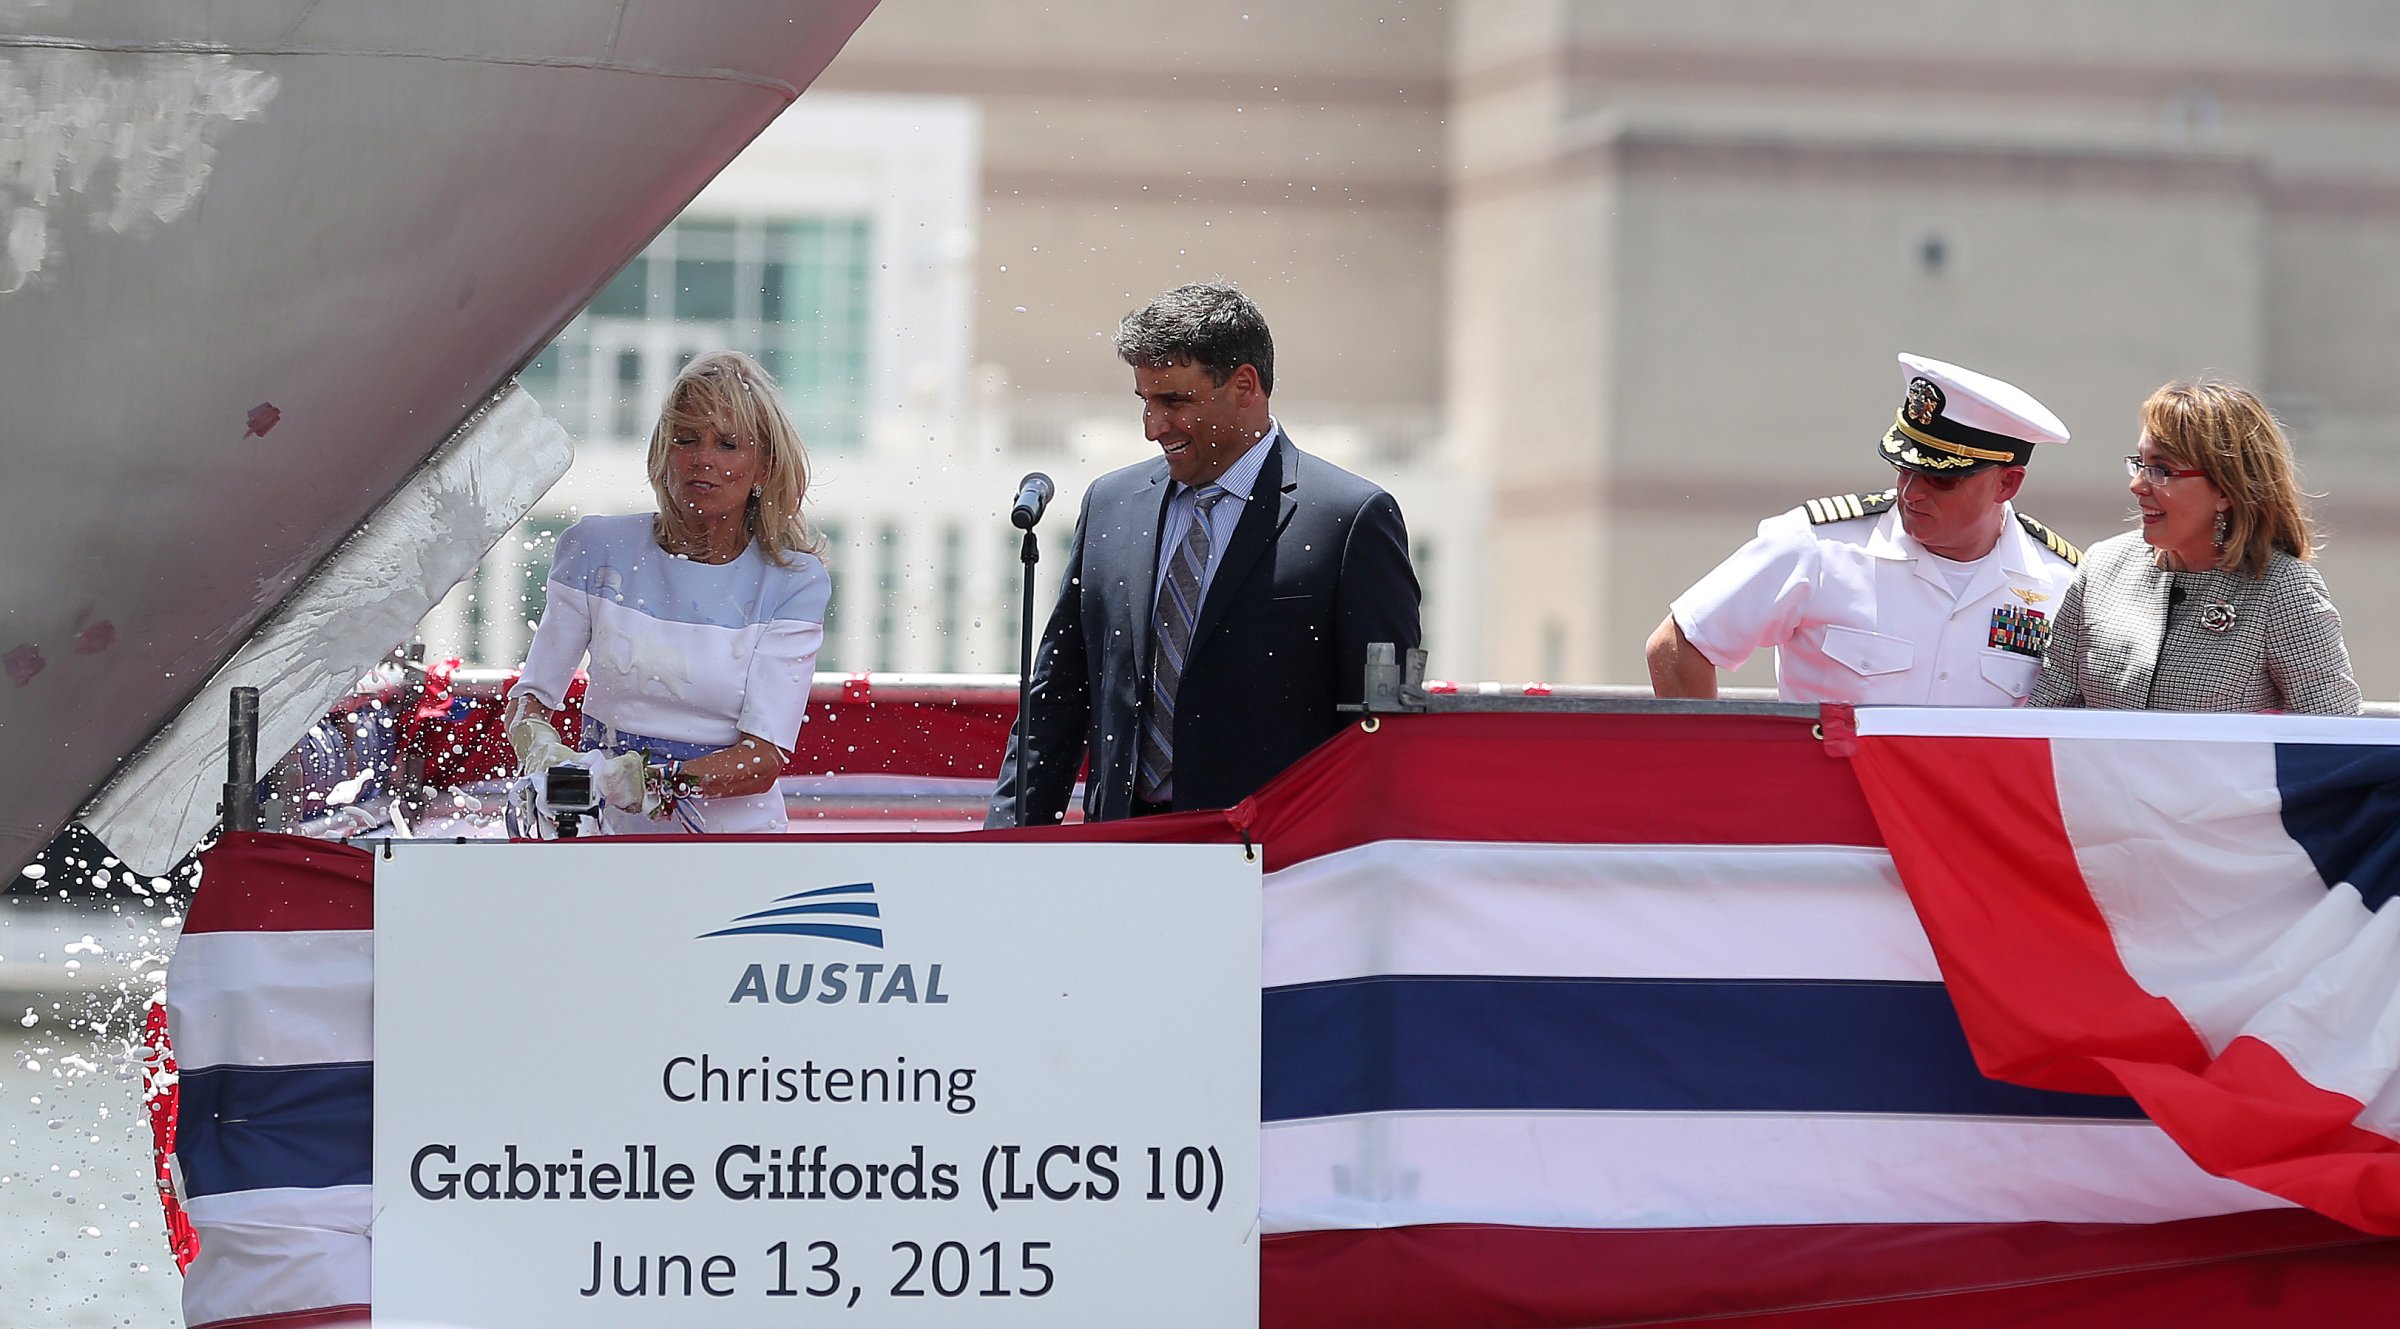 LCS Gabrielle Giffords Christening